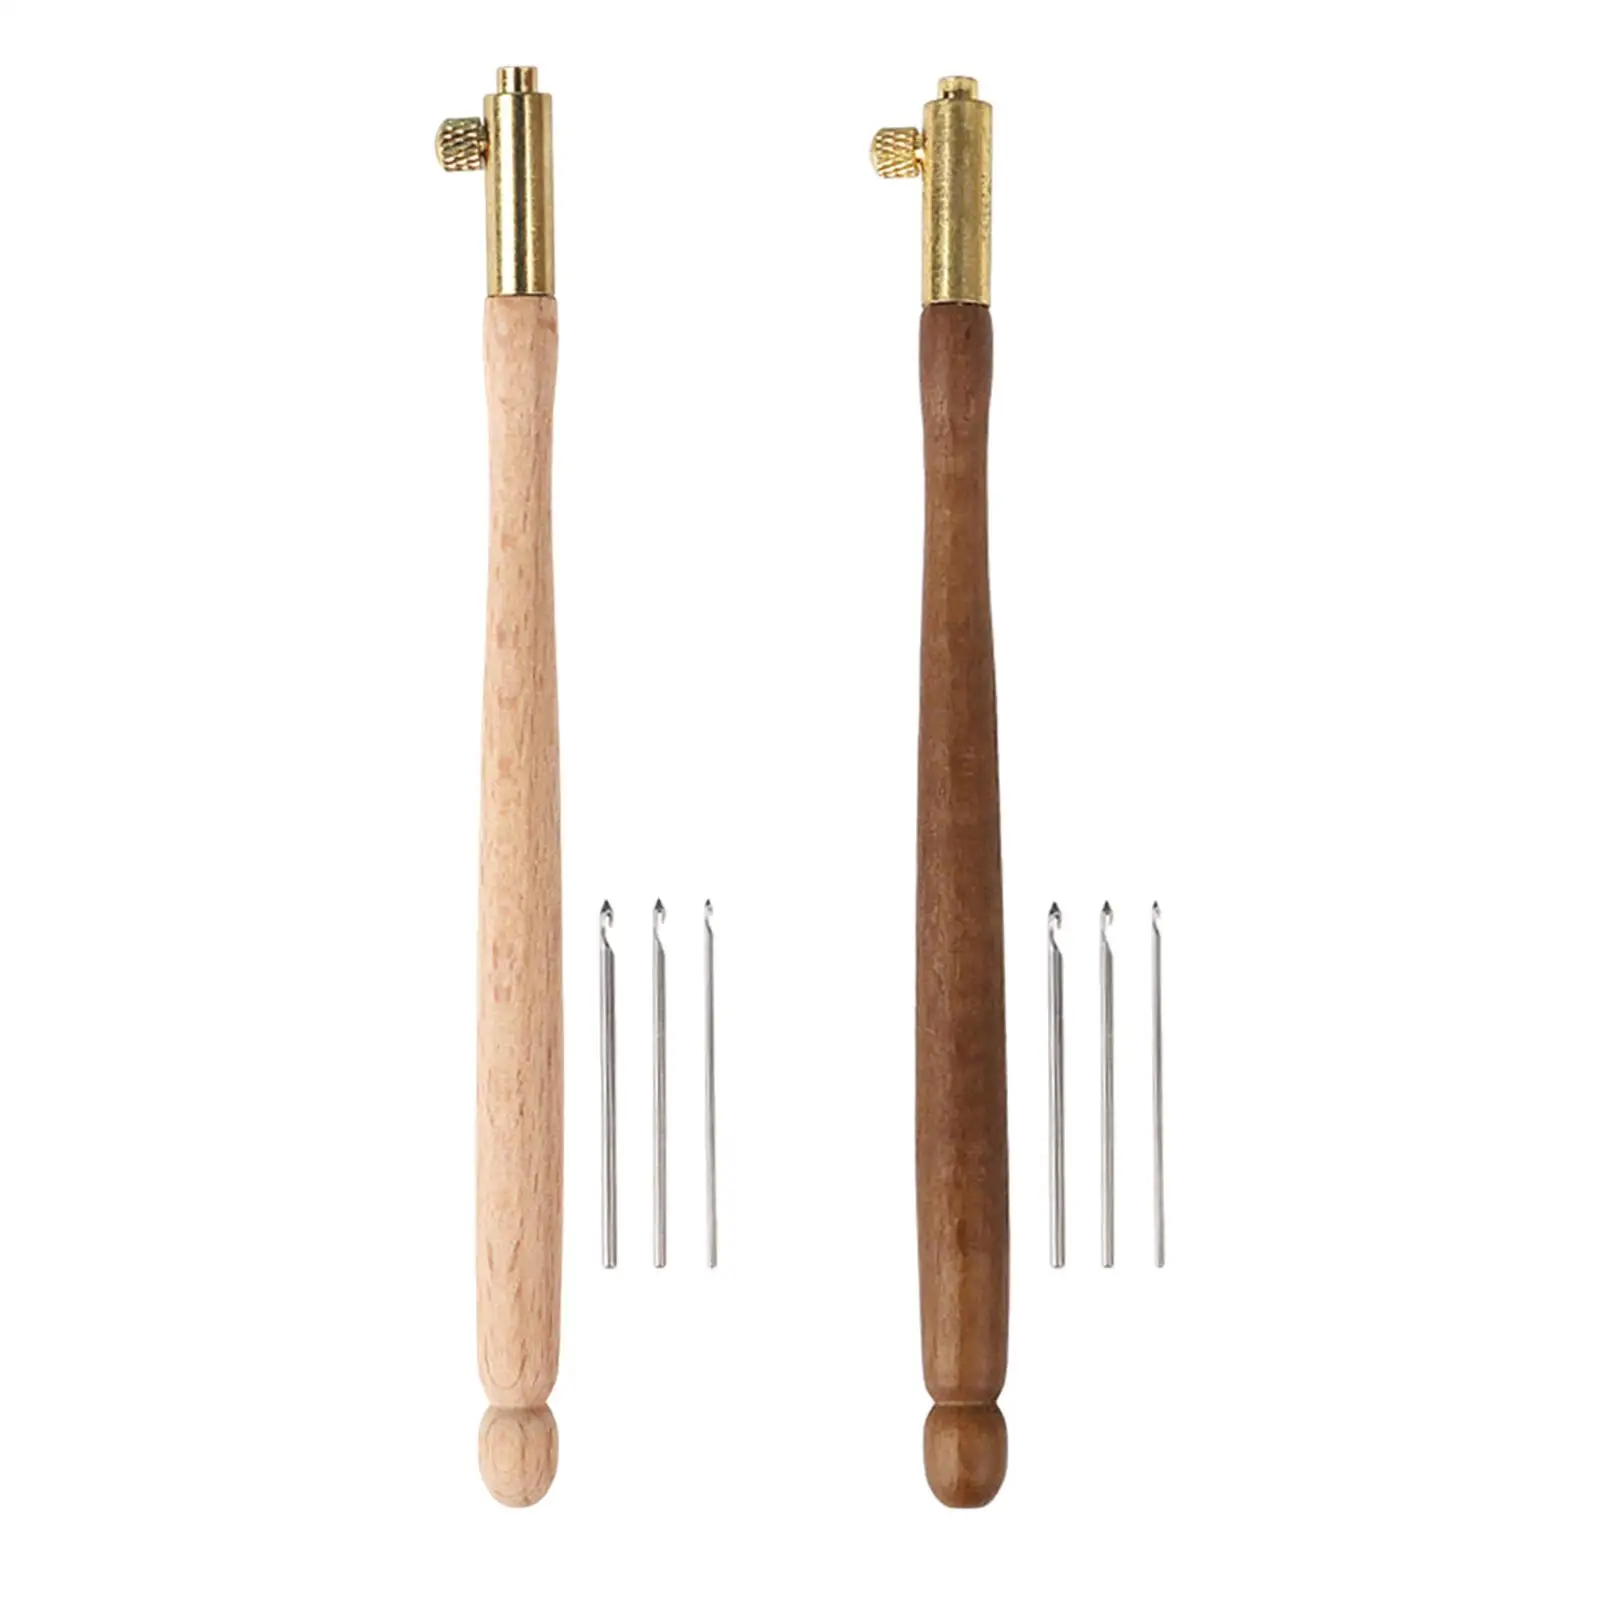 Tambour Hook Embroidery Beading Tools Set 0.7mm/1.0mm/1.2mm Sequin Beads Set Wooden Handle Tambour Beading for Sewing Knitting